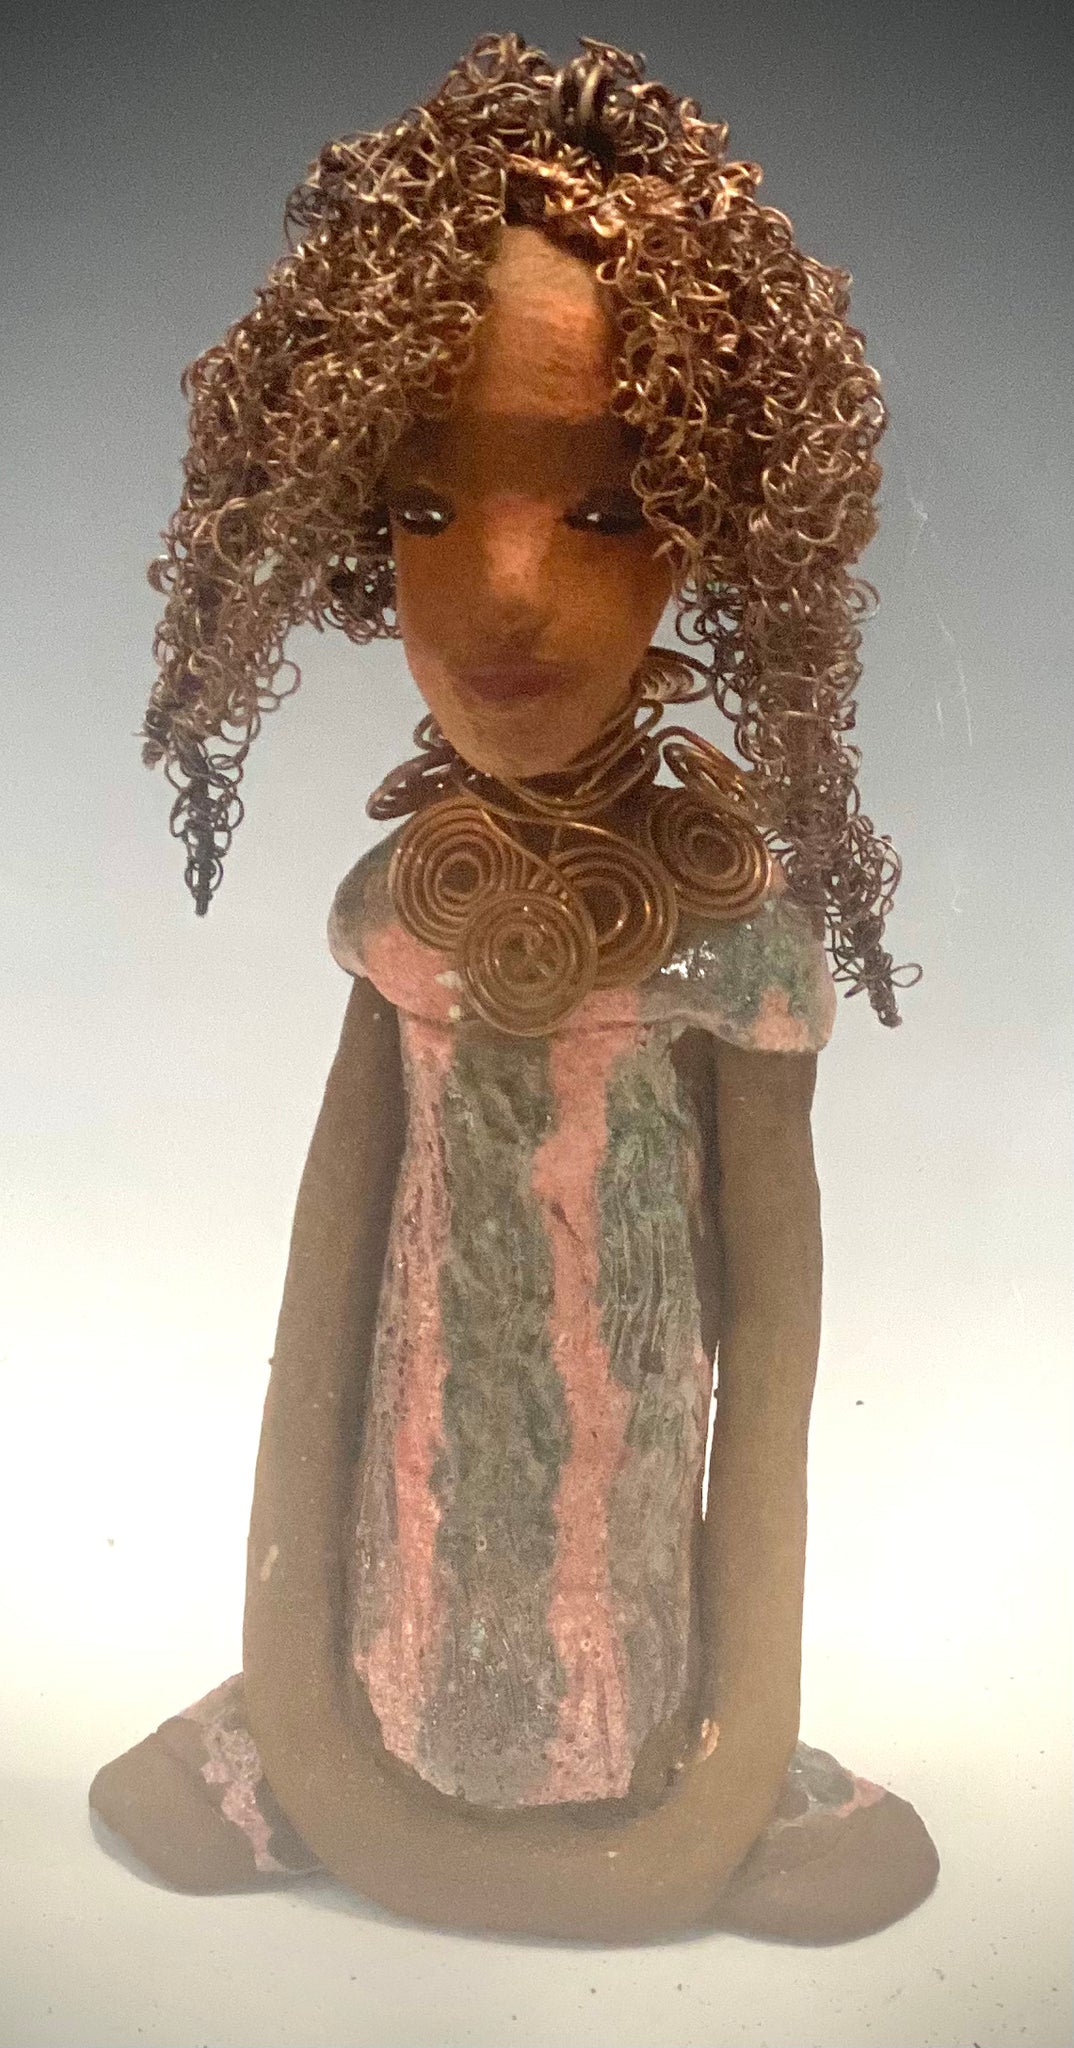 " I am really pleased with Jada's copper coiled necklace and her new wire hair. It complements her well!" Jada stands 9" x 4.5" x 2.5" and weighs 1 lb. She has a lovely two tone honey brown complexion. Jada's dress is a metallic glaze with copper red stripes. She has her long loving arms resting at her side. Find a place in your space for Jada!